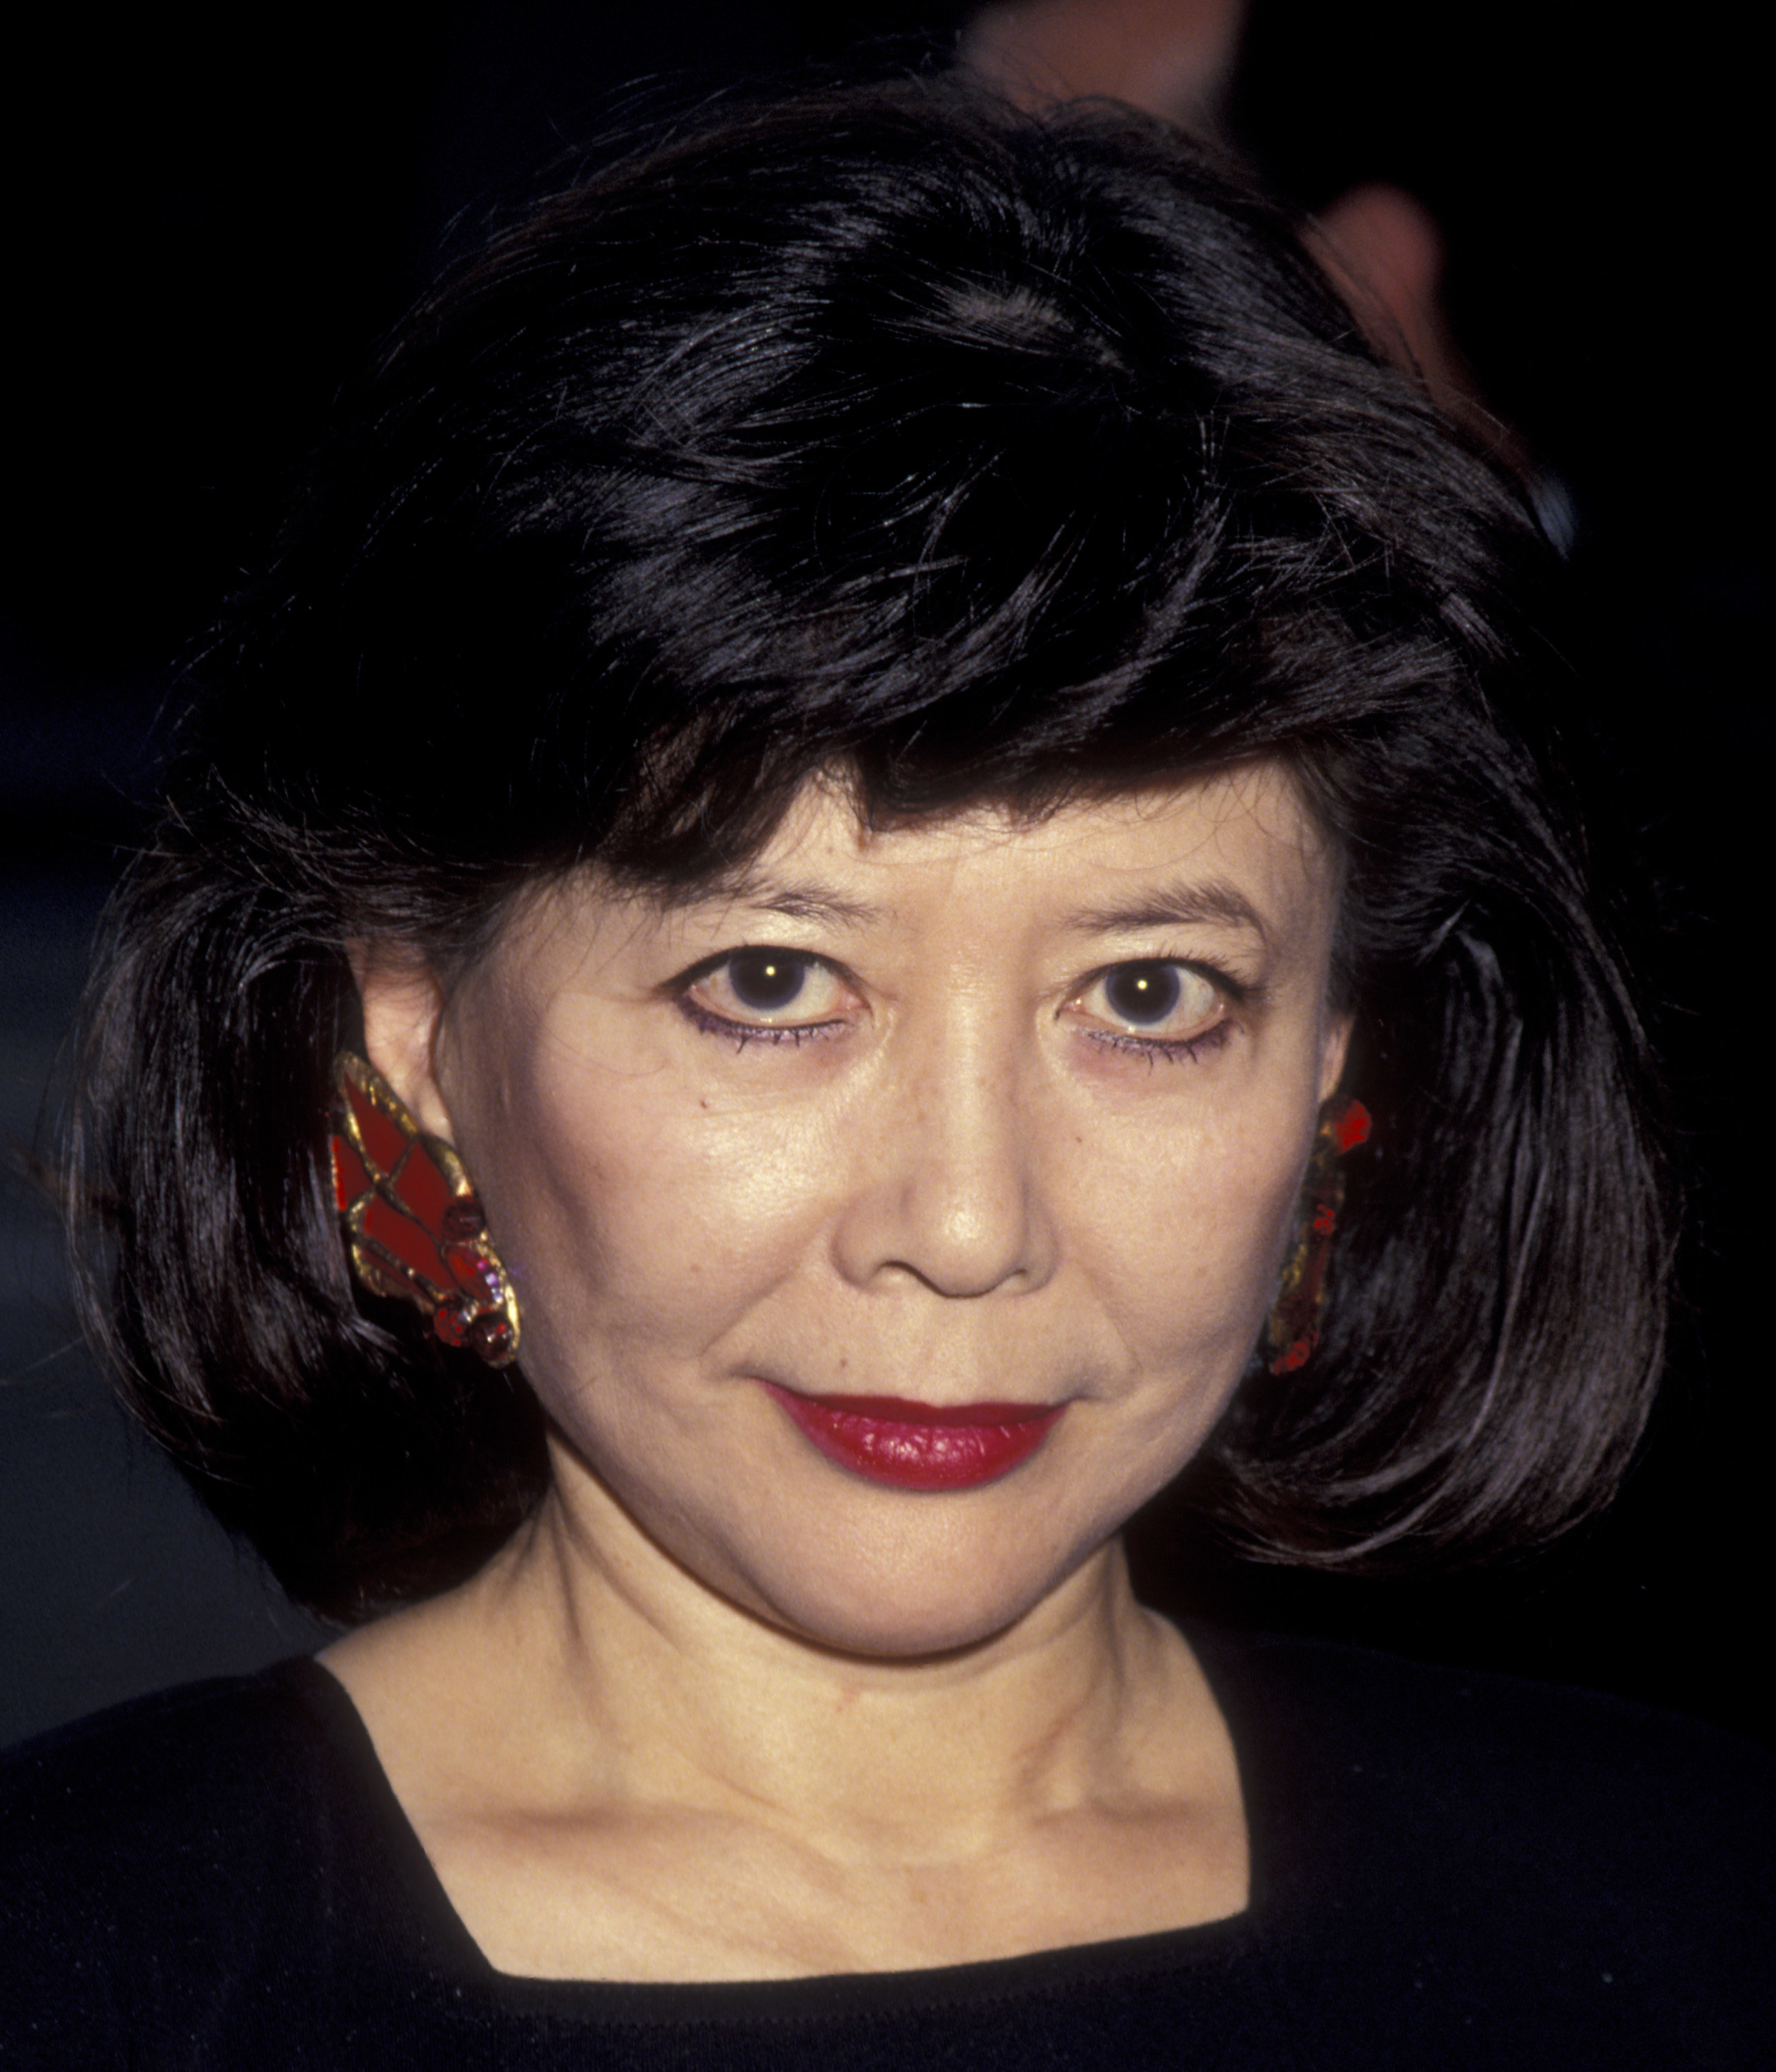 Tsai Chin attends the screening of &quot;The Joy Luck Club&quot; on August 28, 1993 at the Crest Theater in Westwood, California